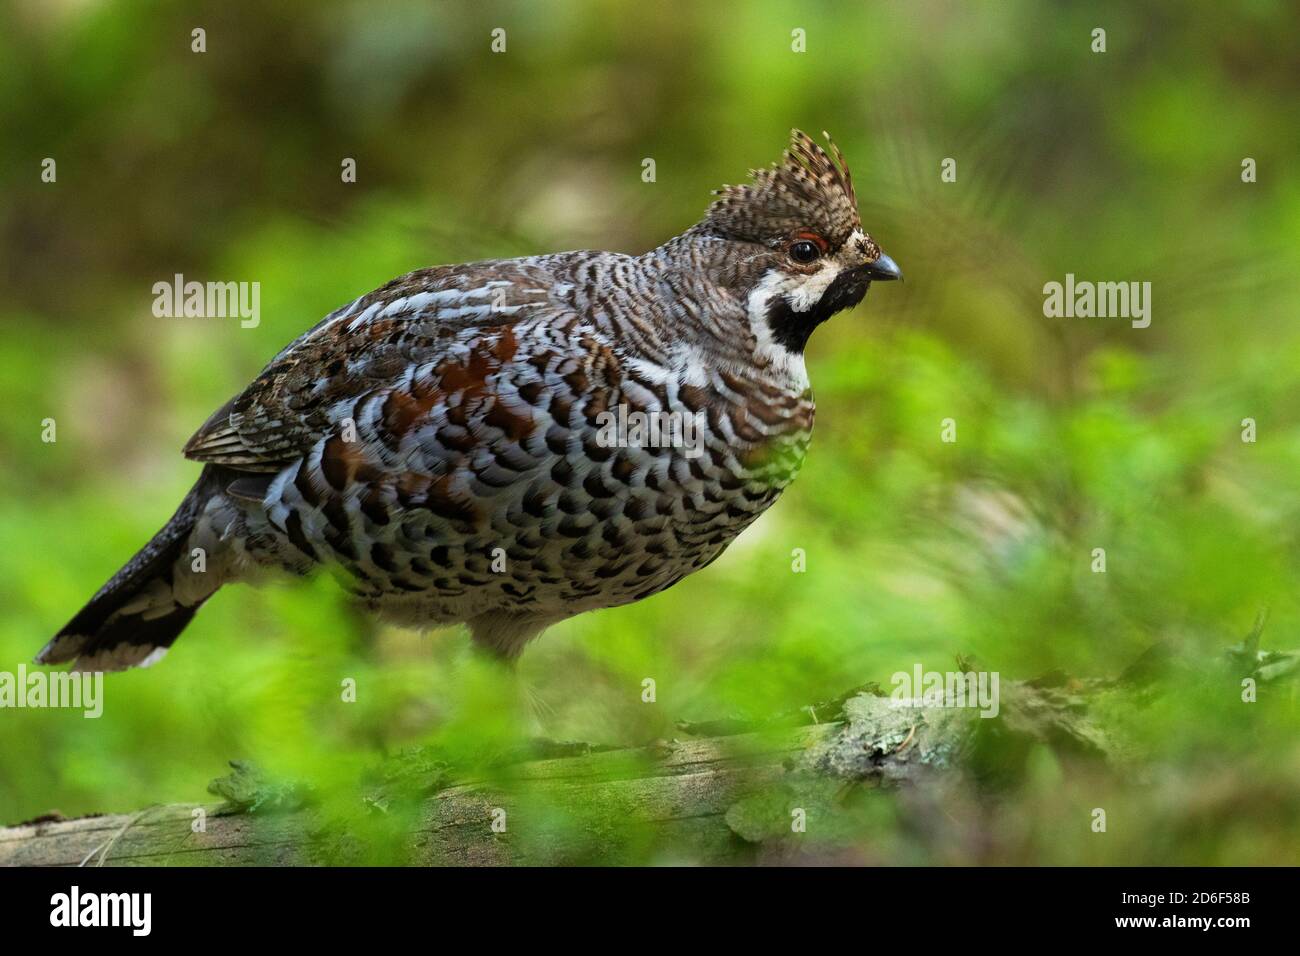 A male Hazel grouse (Tetrastes bonasia) with a raised crest feathers in a green, lush and old boreal forest during spring breeding season in Estonia, Stock Photo